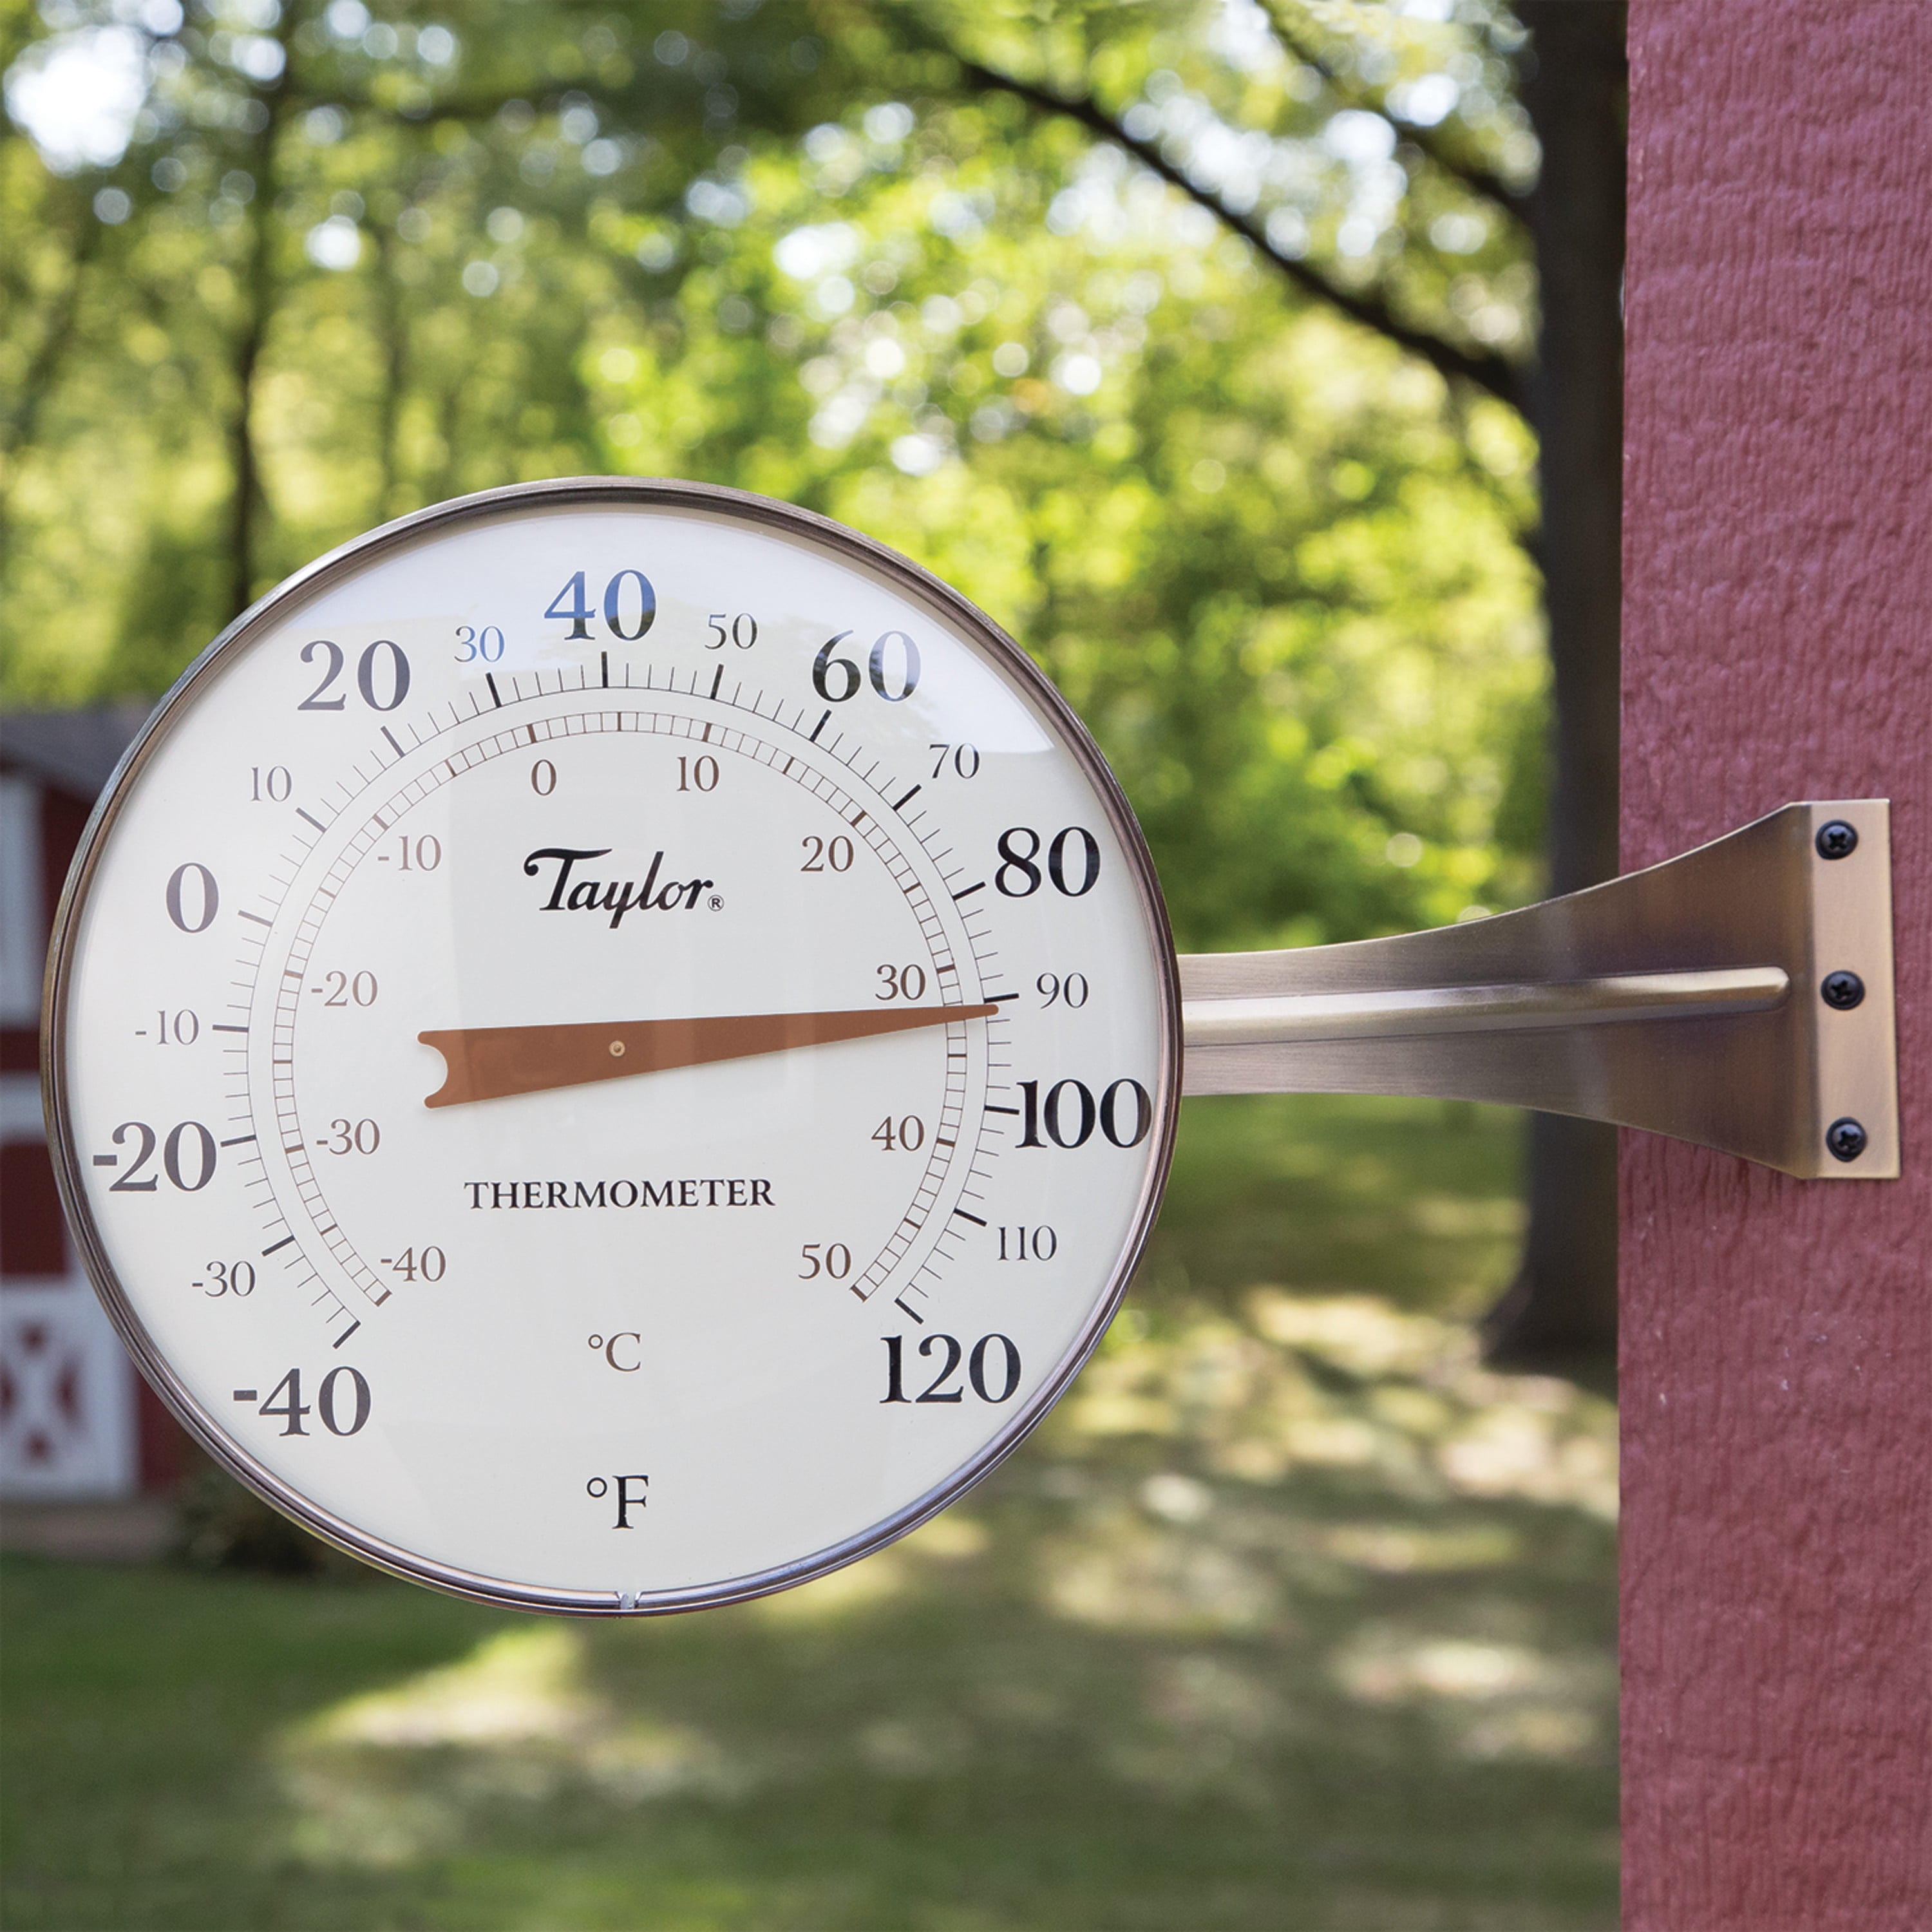 Taylor Precious Spirit-Filled Metal Outdoor Thermometer Waterproof